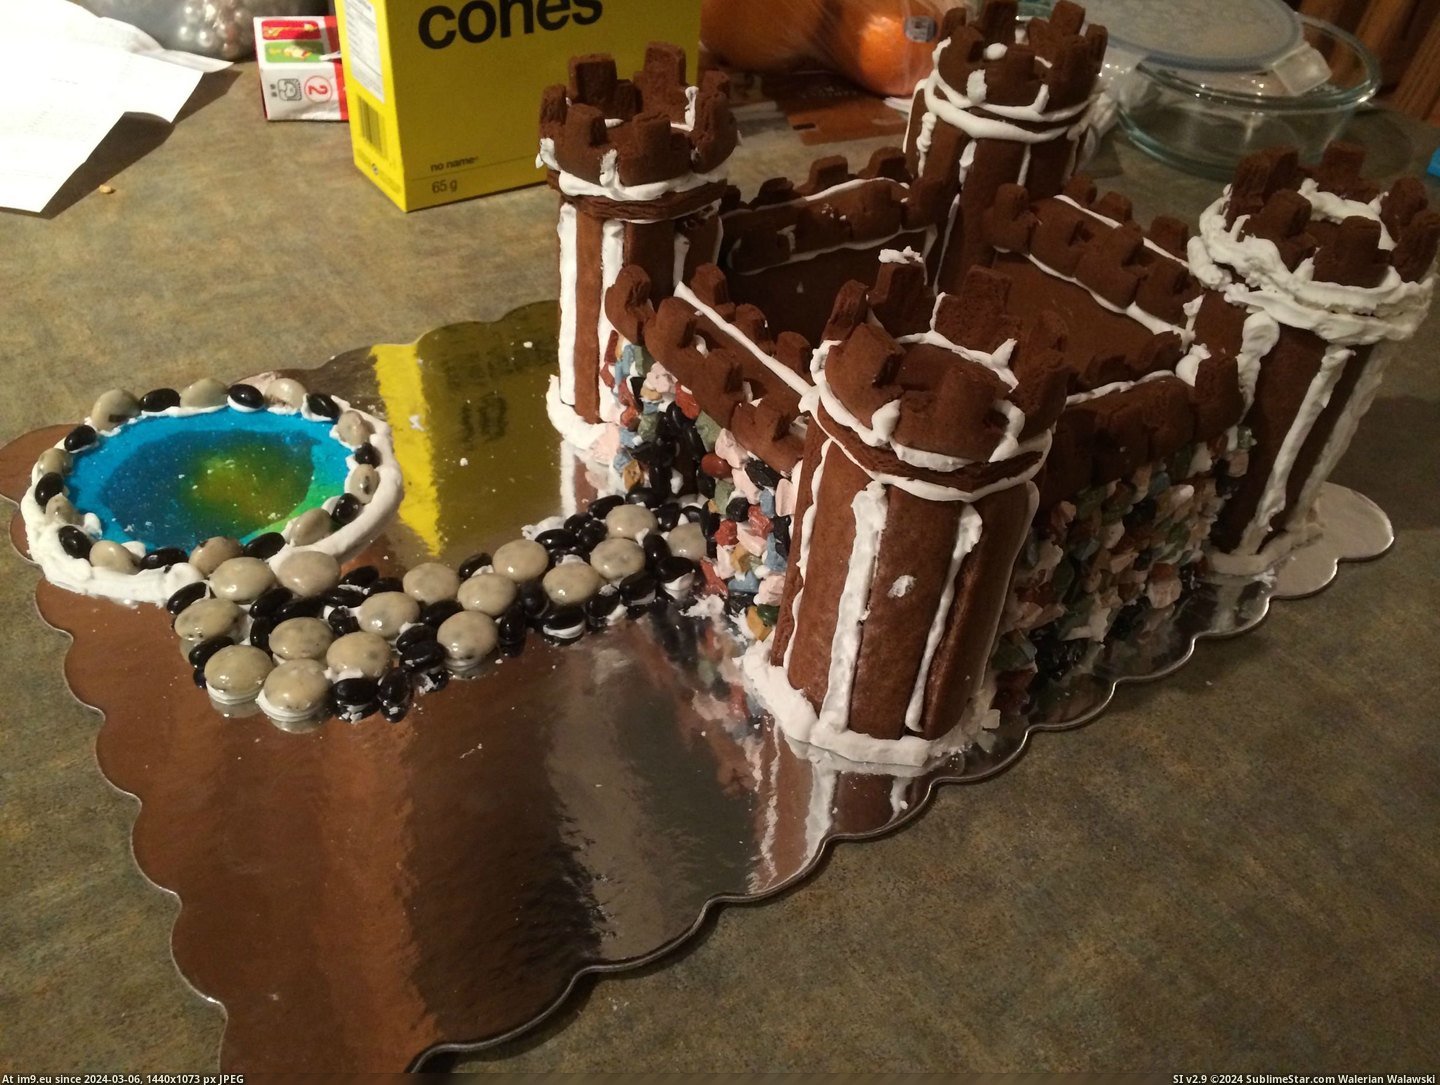 #Husband #Get #Our #Divorced #Collaborated #Project #Gingerbread #Success [Pics] My husband and I collaborated on our first gingerbread project and didn't get divorced...success! 12 Pic. (Изображение из альбом My r/PICS favs))